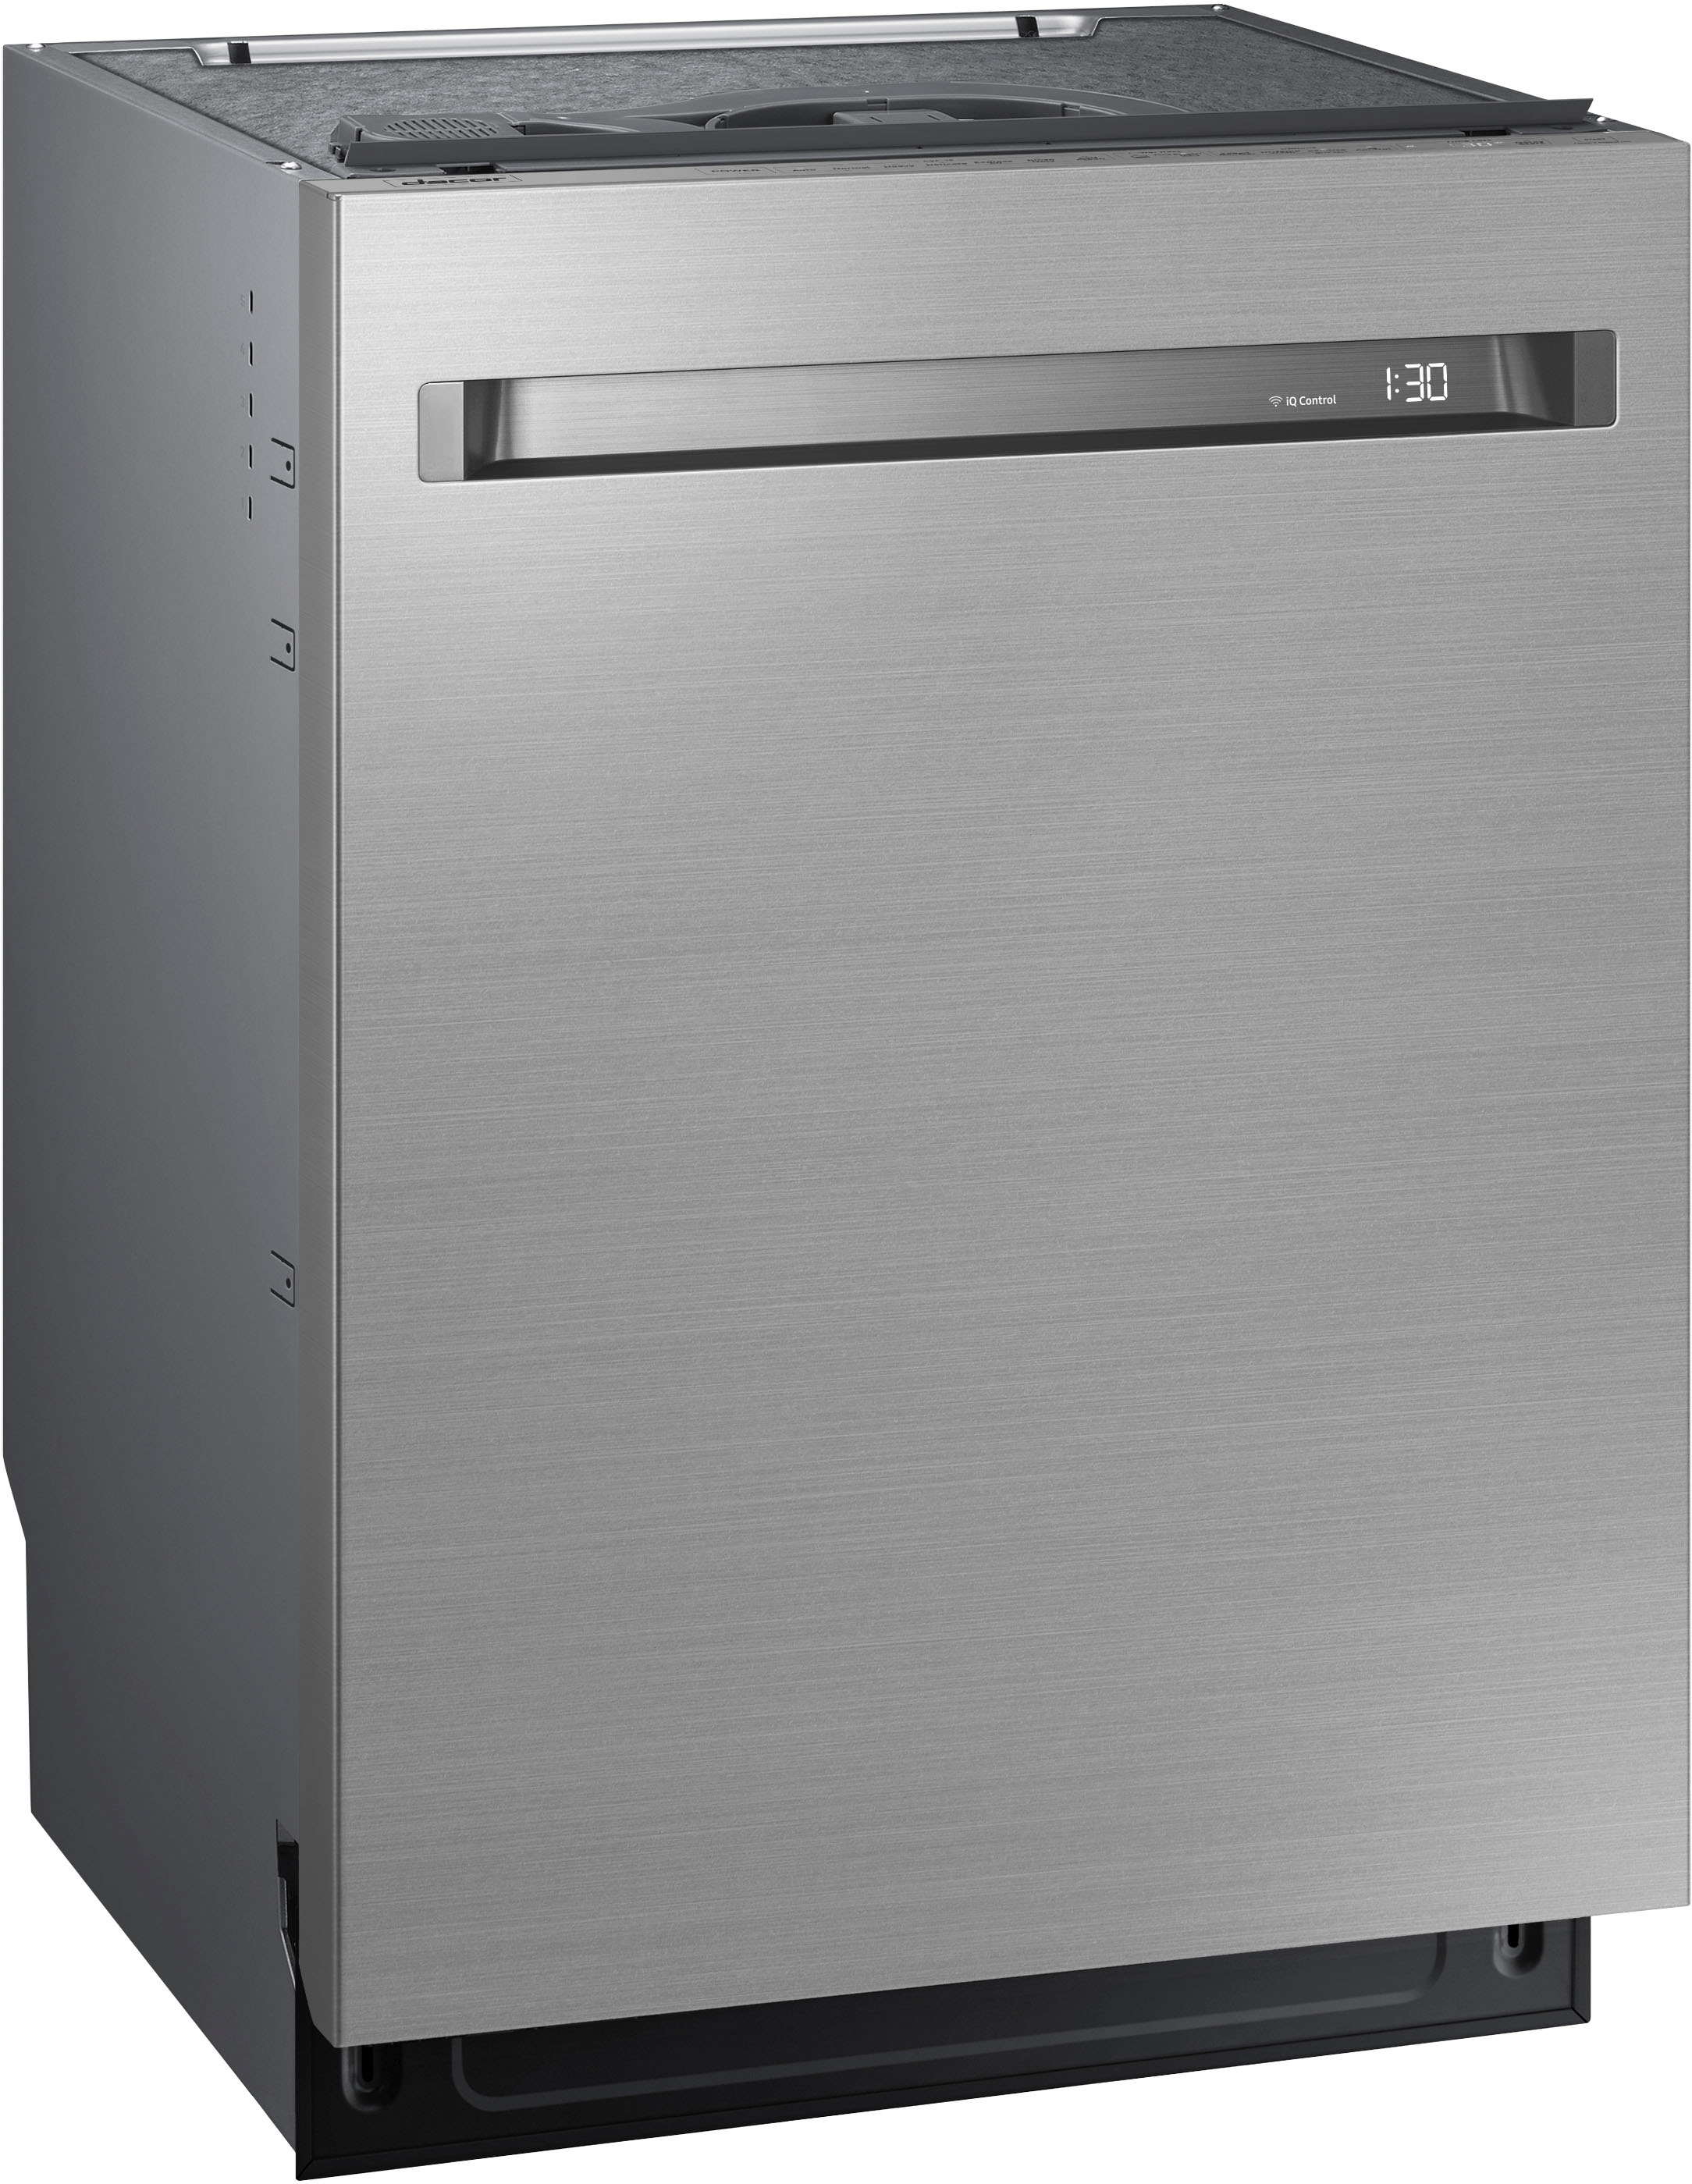 Left View: Dacor - Professional Top Control Built-In Dishwasher with Stainless Steel Tub, WaterWall™, 3rd Rack, 44 dBA, Handle Required - Silver stainless steel